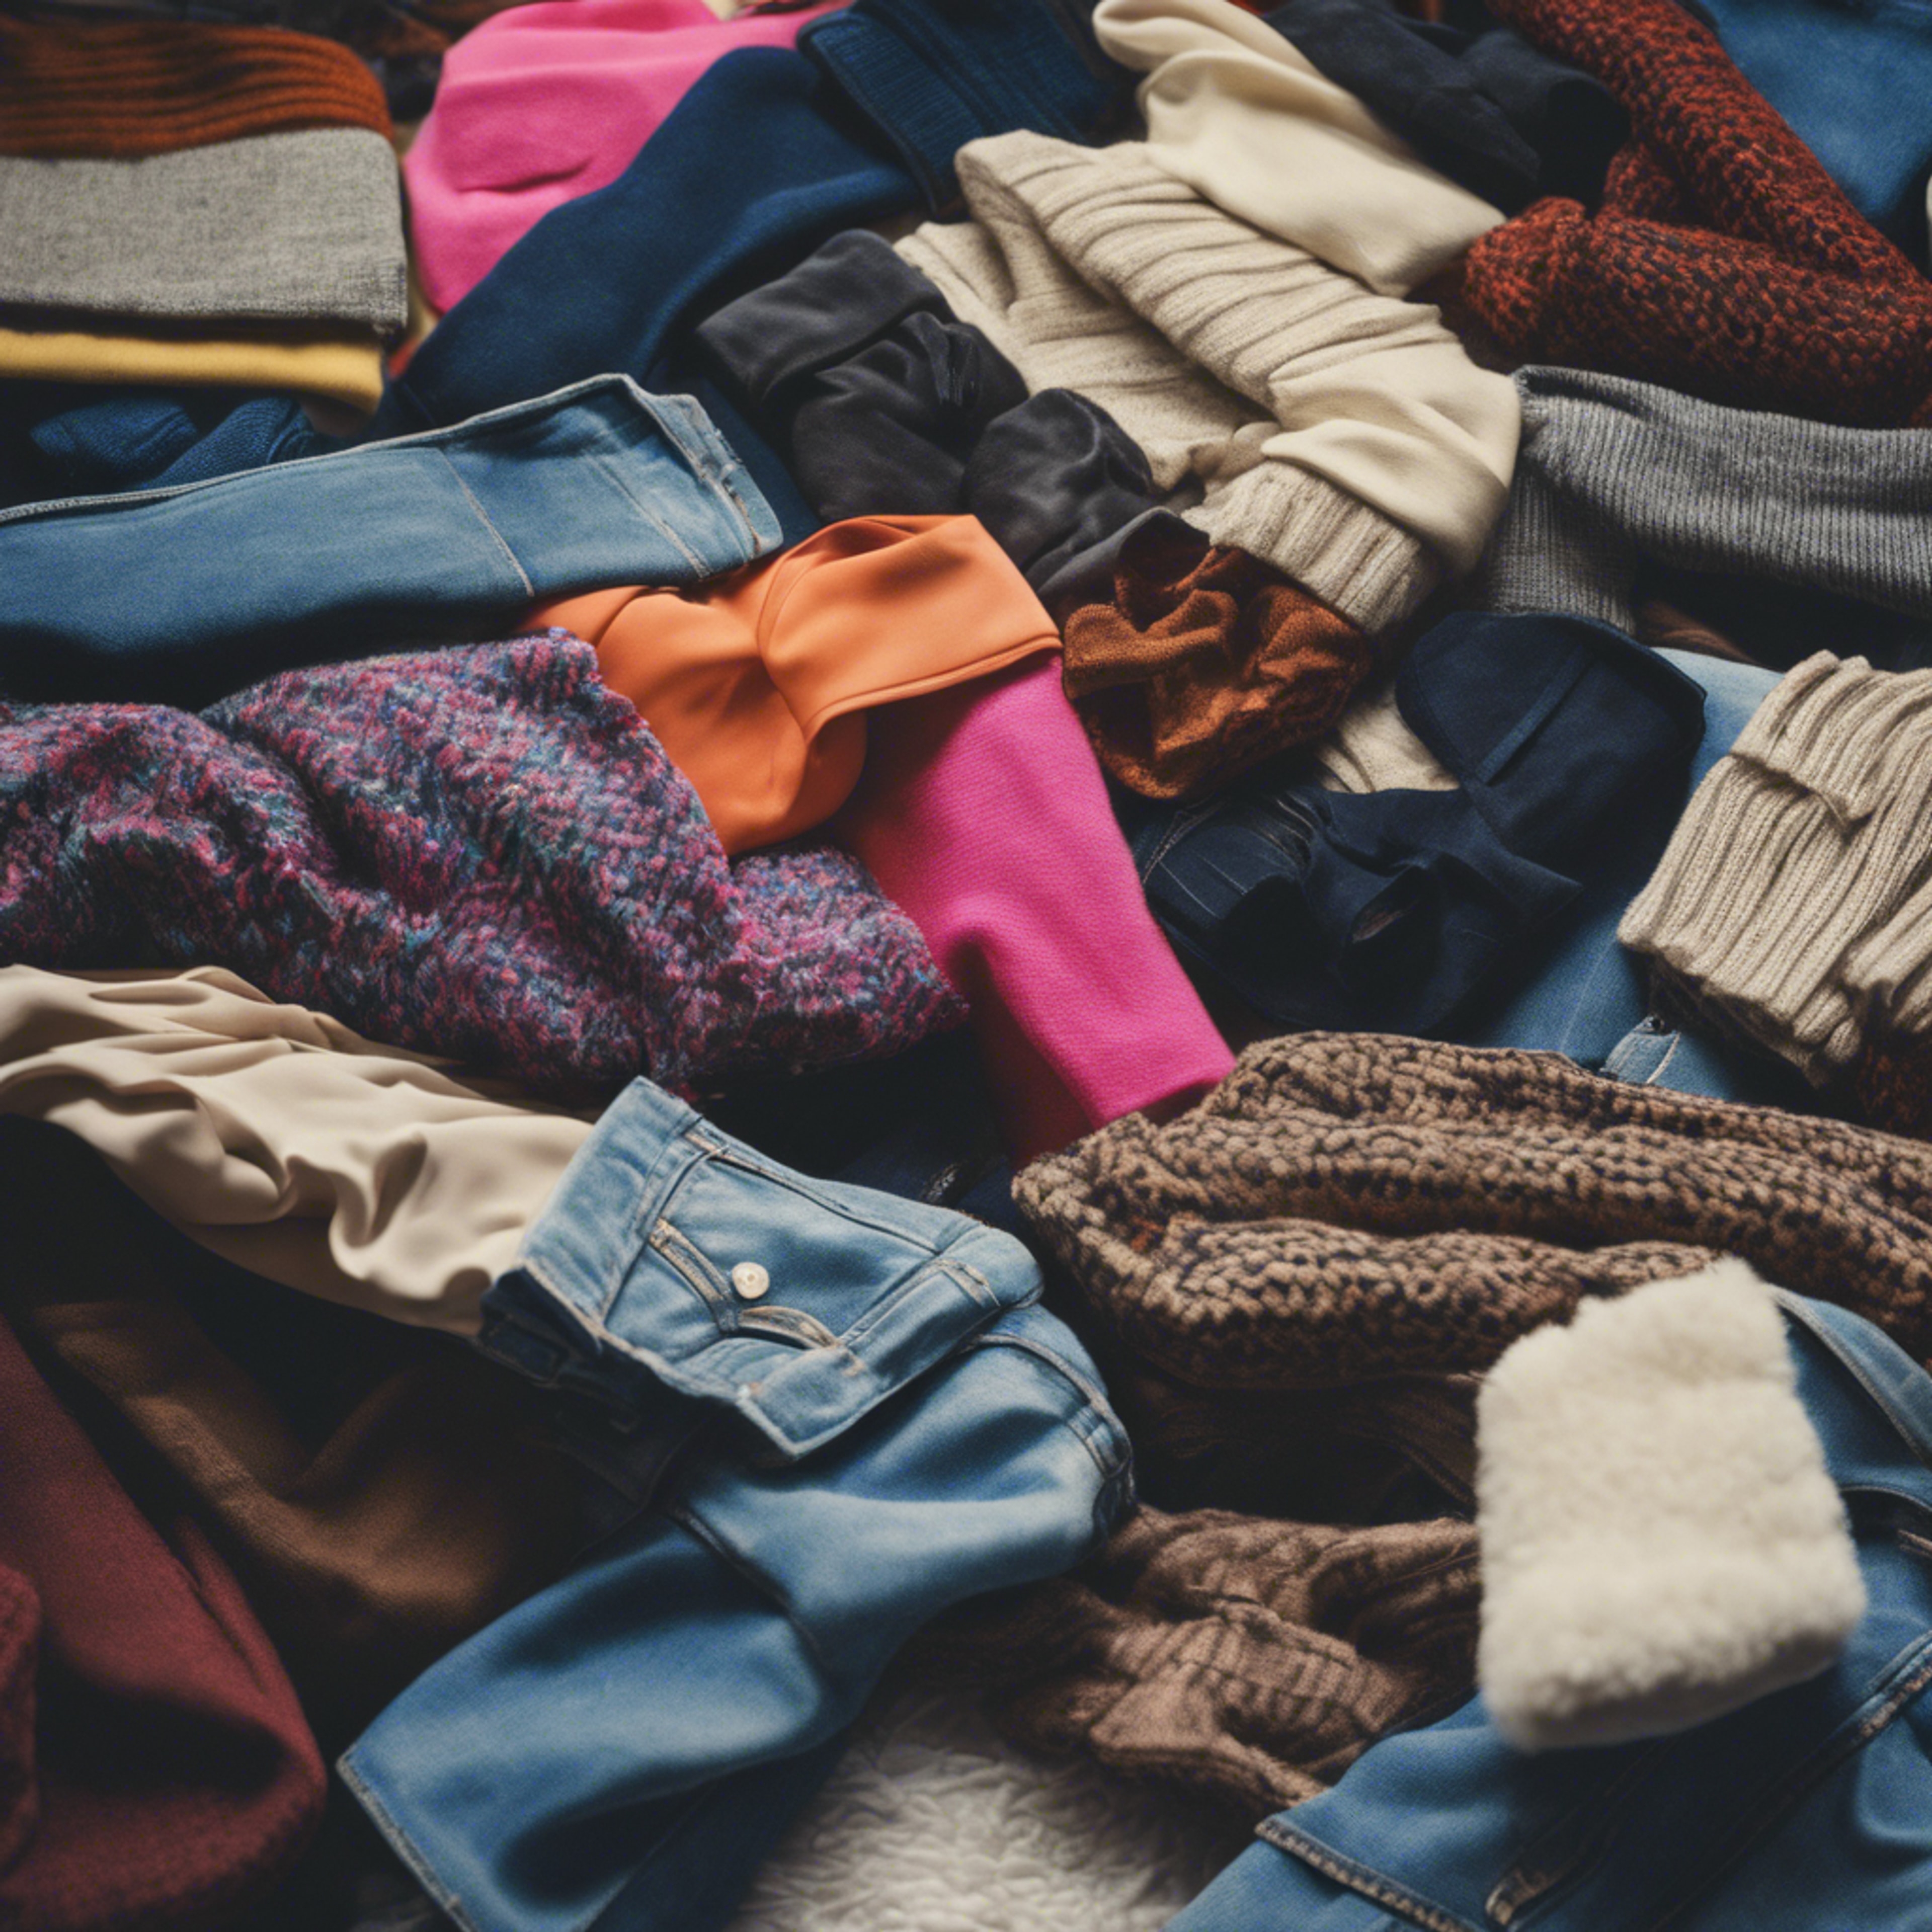 A pile of iconic 80s fashions such as leg warmers, oversized blazers, and high-waisted jeans. Tapetai[dbd69f645b7844d6a4c4]